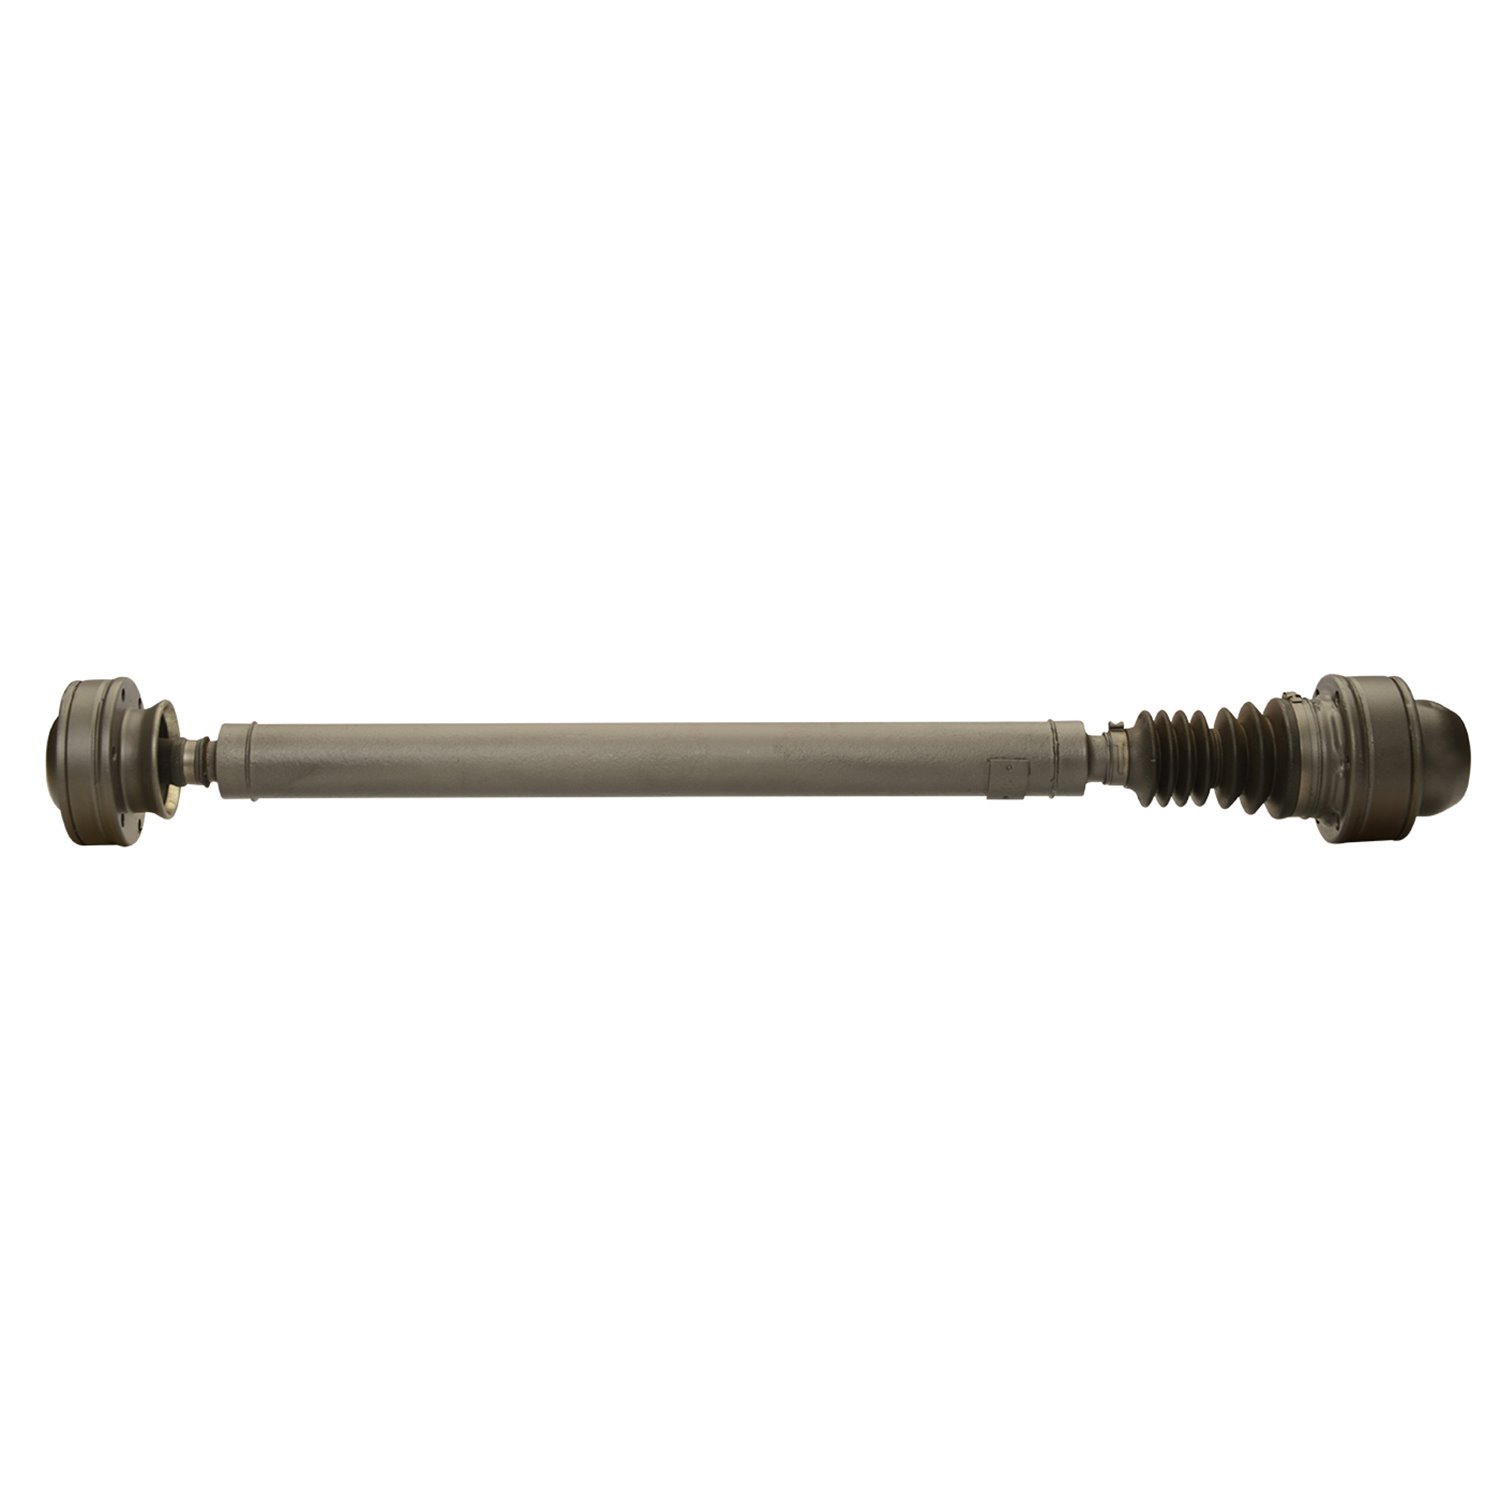 USA Standard ZDS9323 Front Driveshaft, For Jeep Liberty, 20 in. Weld-To-Weld